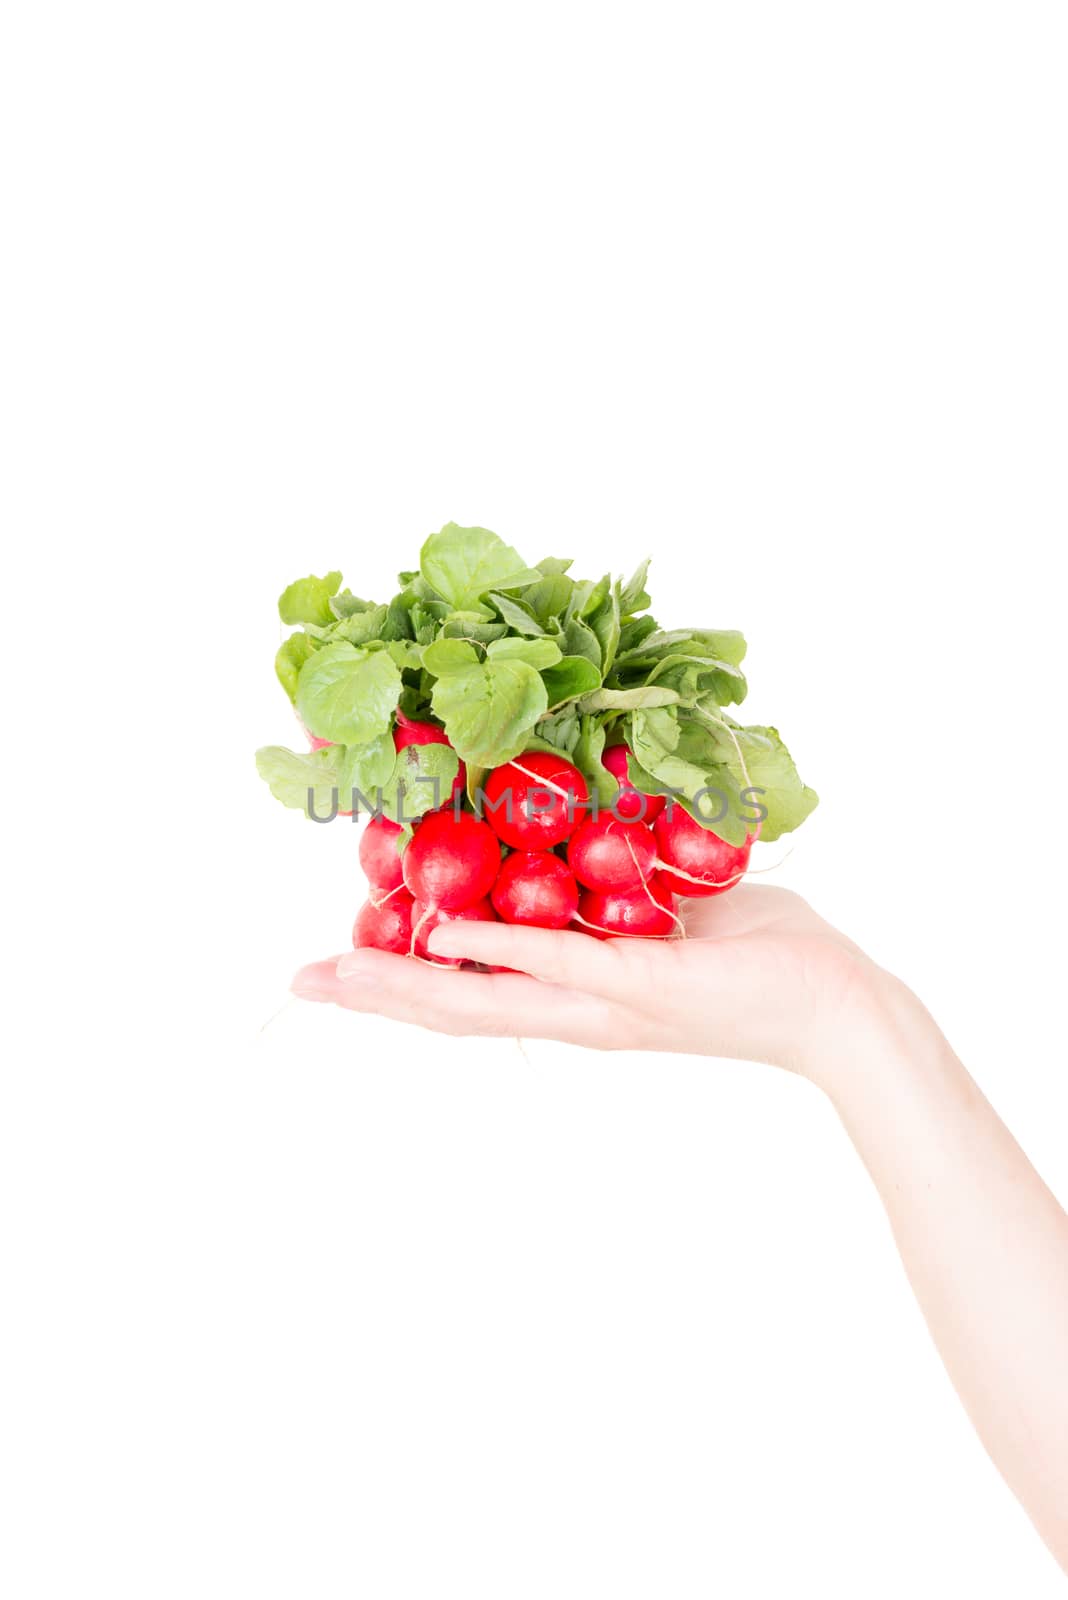 Red radish isolated on white background in human hand